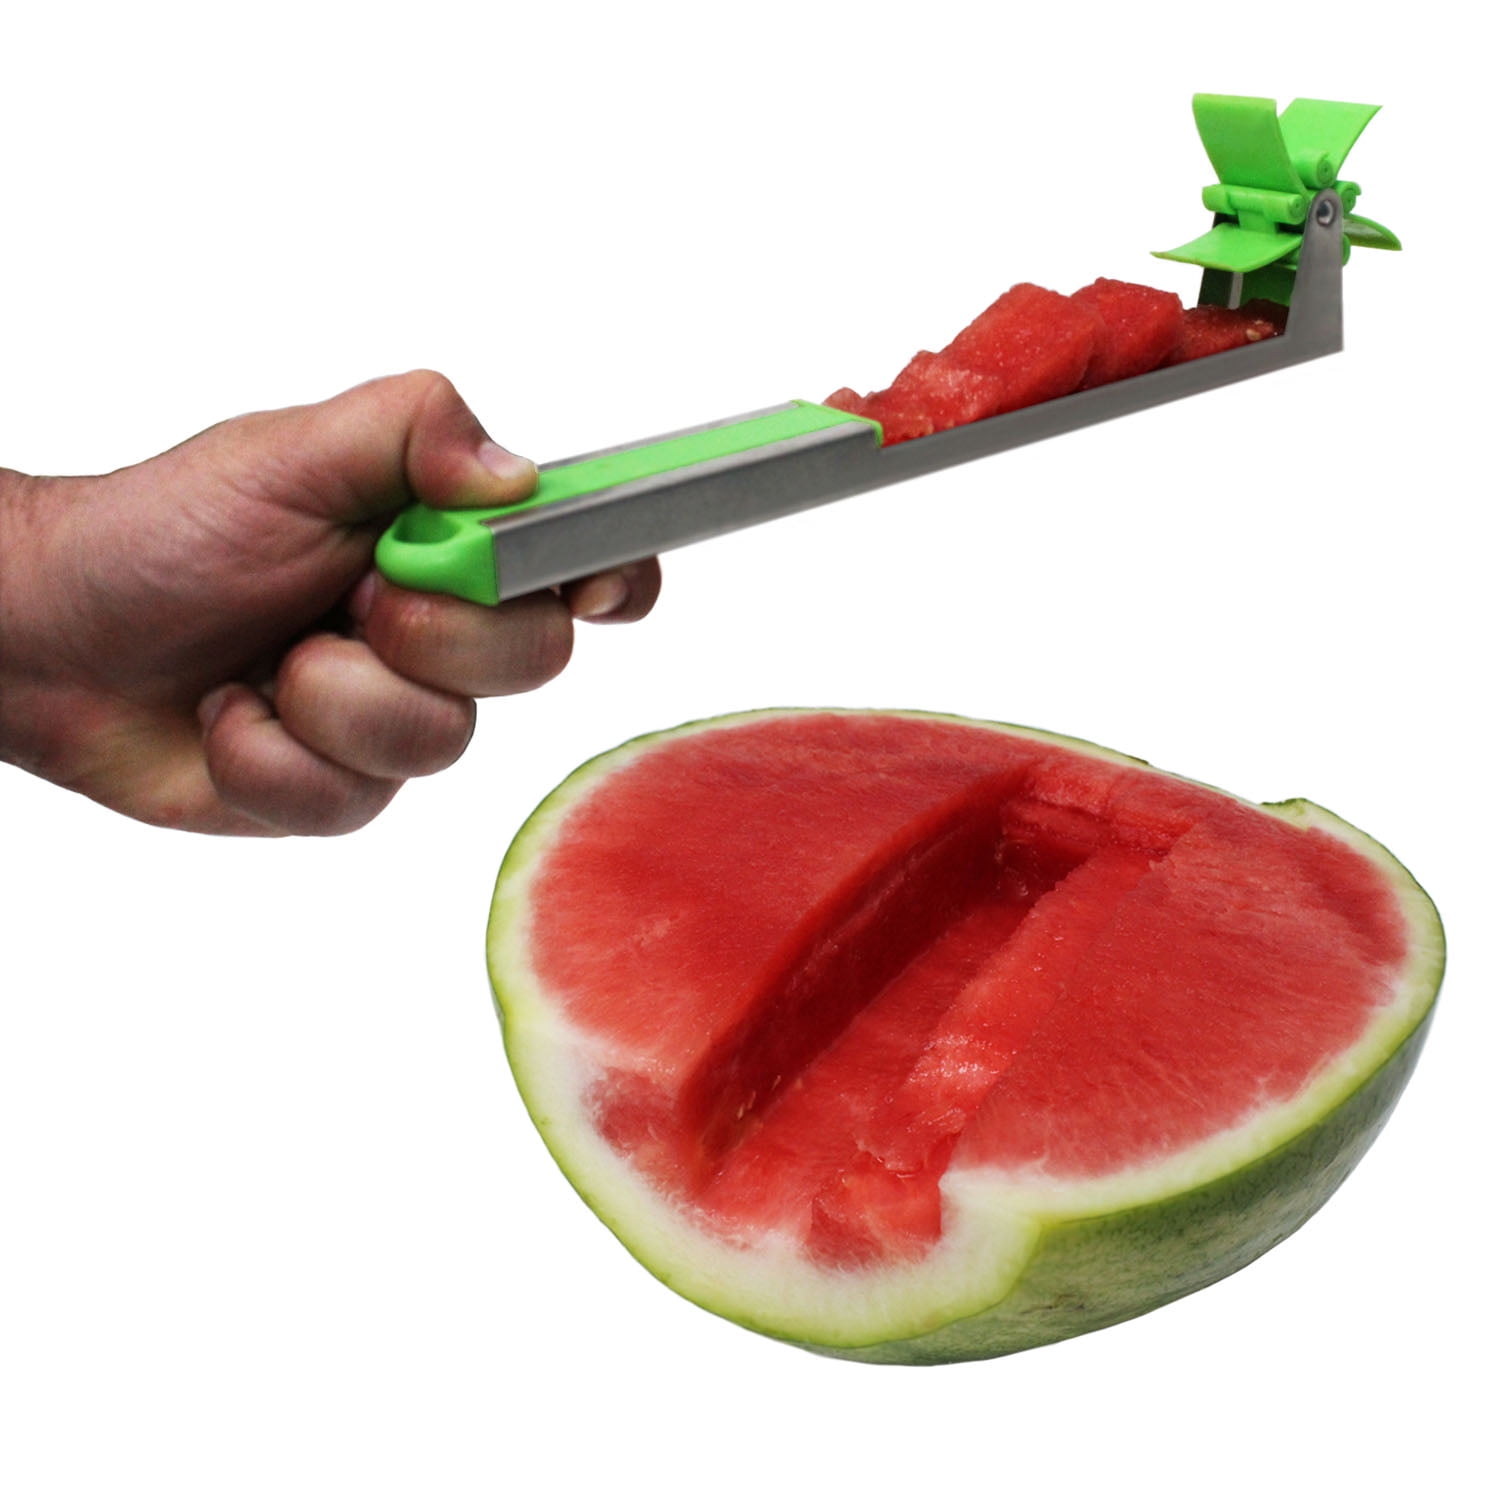 Buy Wowzy 2 IN 1 Deal Watermelon Slicer With Mellon Baller And